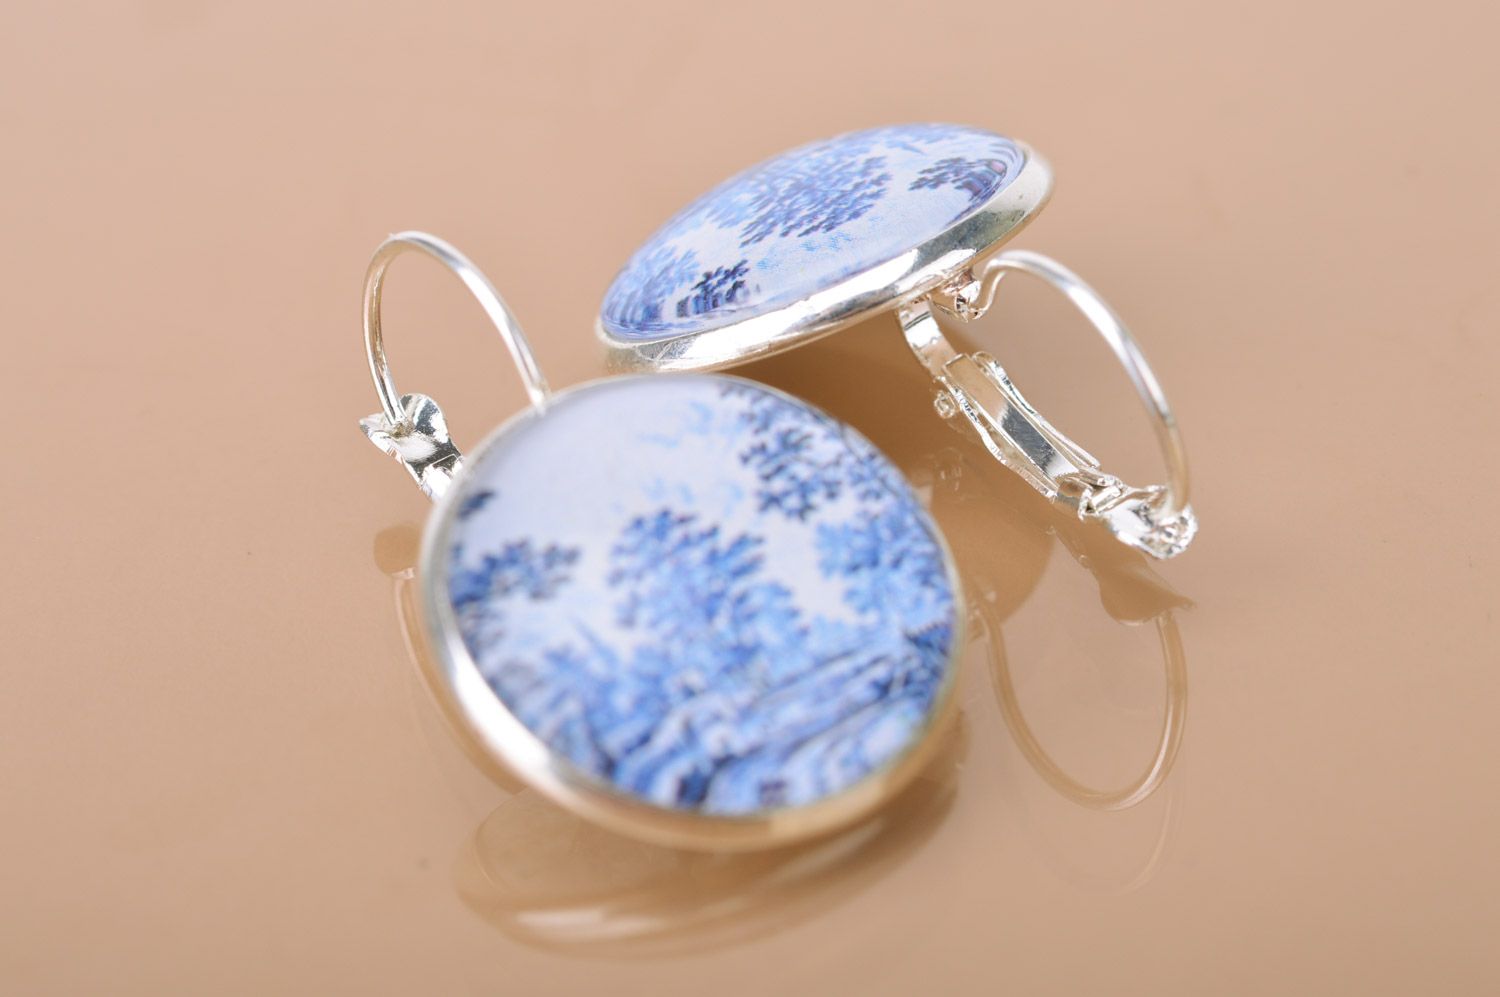 Handmade metal round dangle earrings with landscape print in white and blue colors photo 5